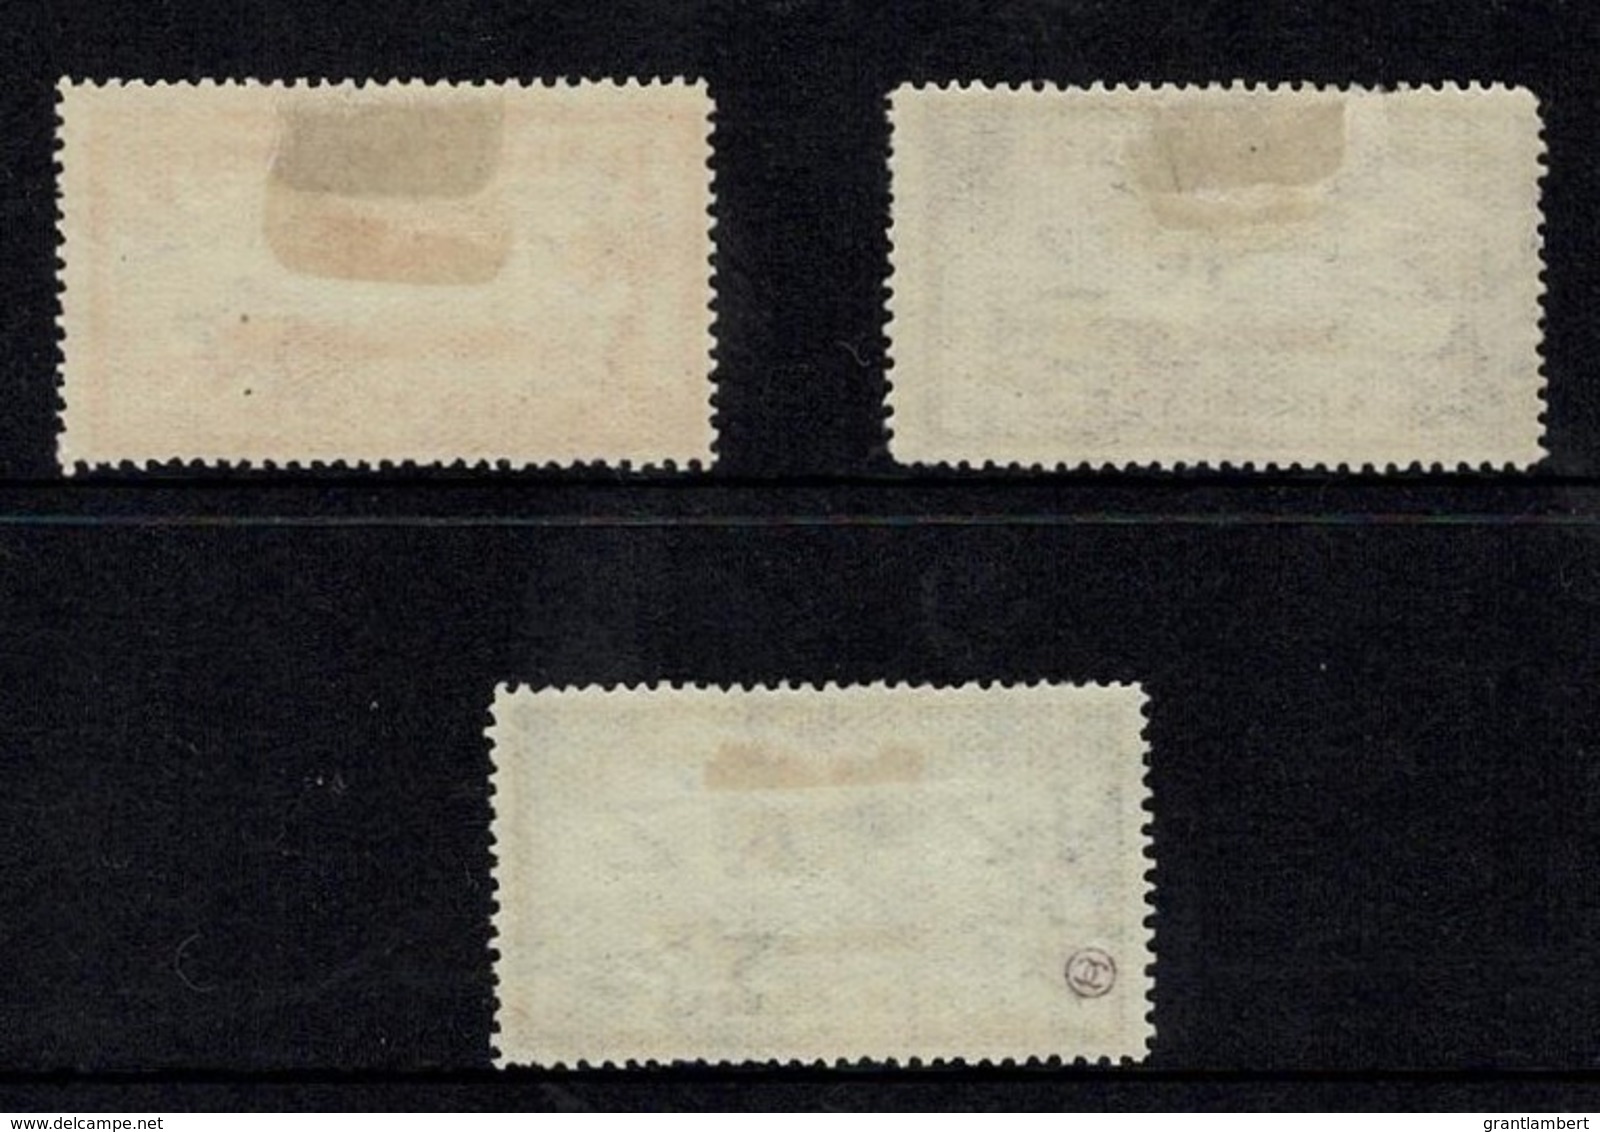 New Zealand 1935 Air Mail Set Of 3 MH - - - Nuovi